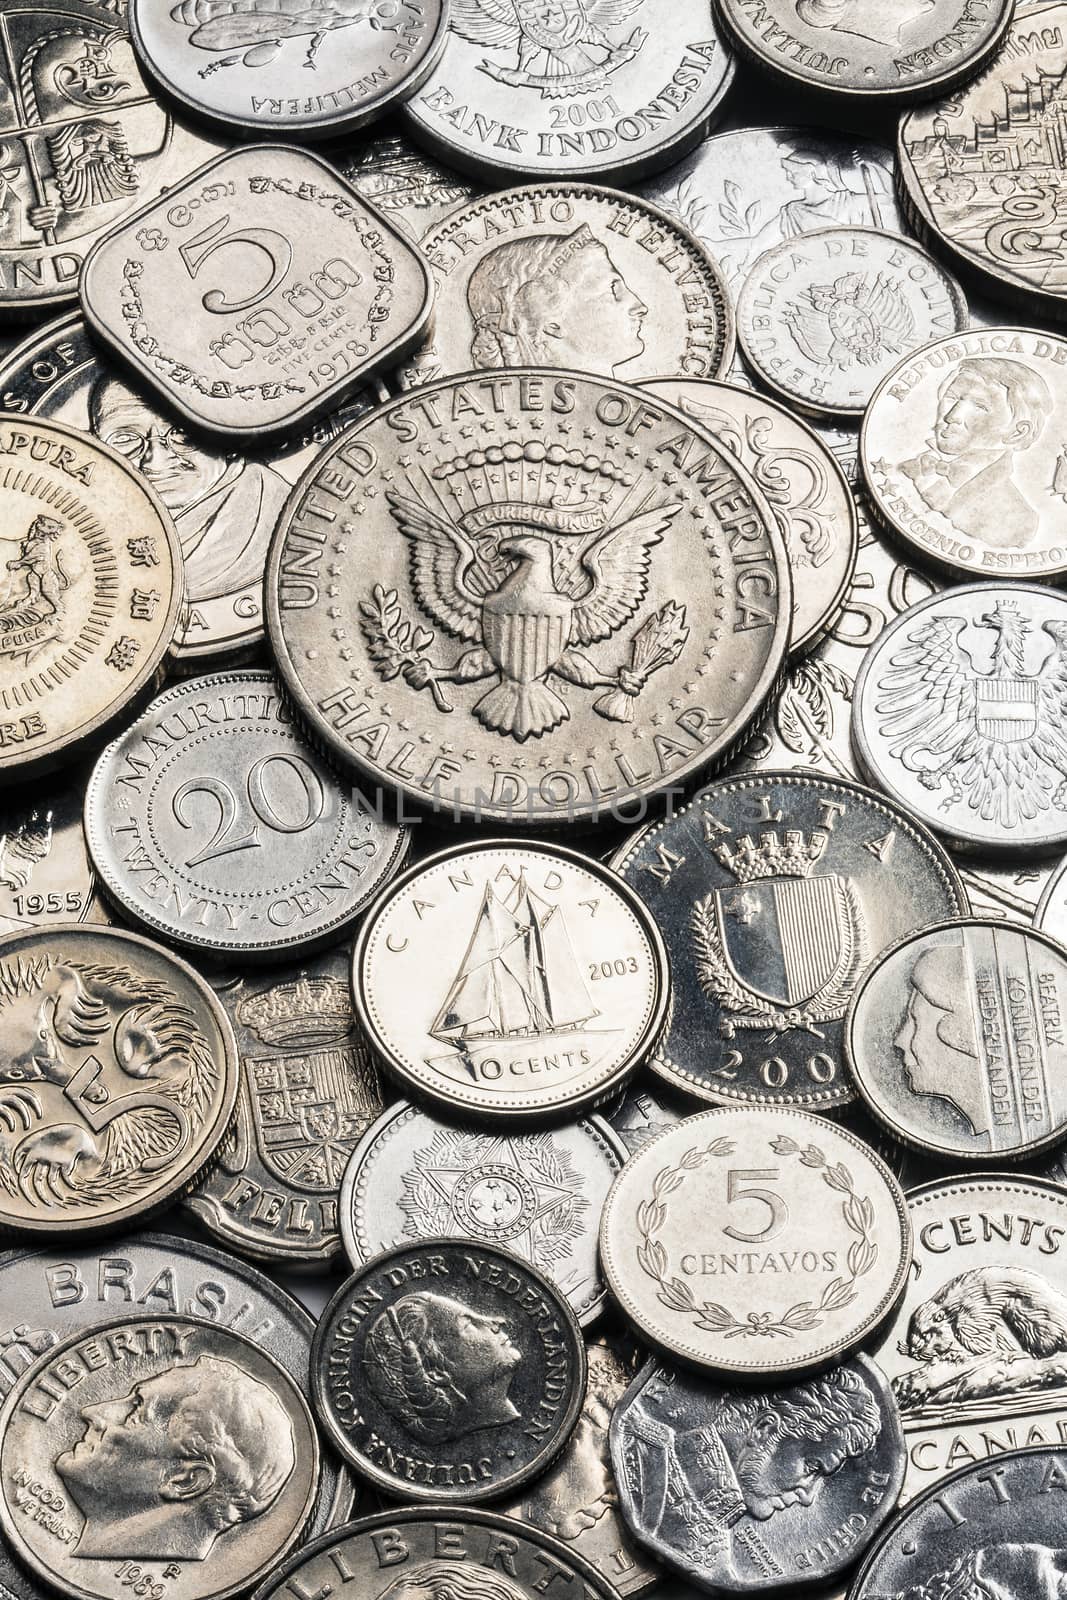 A collection of old silver coins from around the world